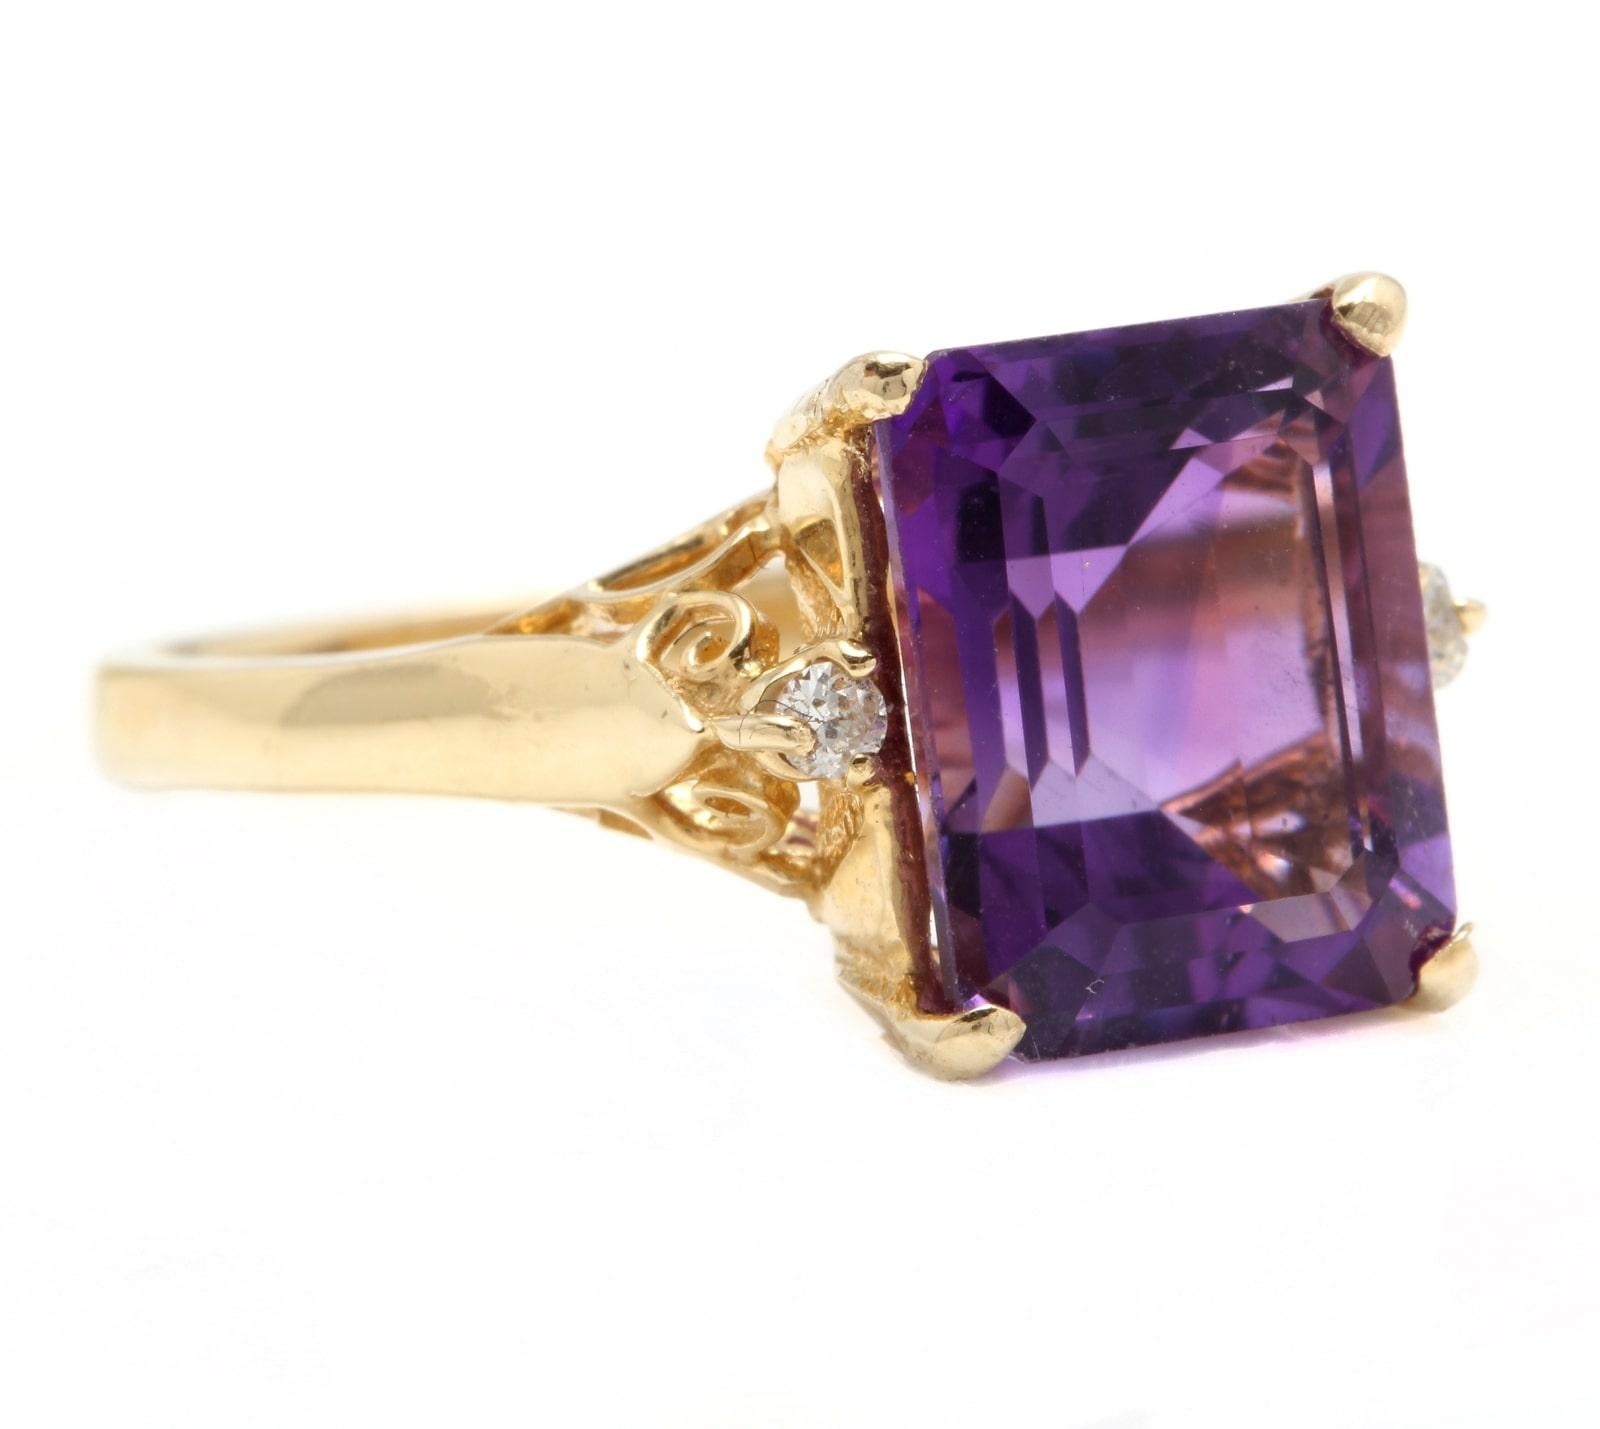 5.08 Carats Impressive Natural Amethyst and Diamond 14K Yellow Gold Ring

Total Natural Amethyst Weight is: Approx. 5.00 Carats

Amethyst Measures: Approx. 11.00 x 9.00mm

Natural Round Diamonds Weight: Approx. 0.08 Carats (color G-H / Clarity